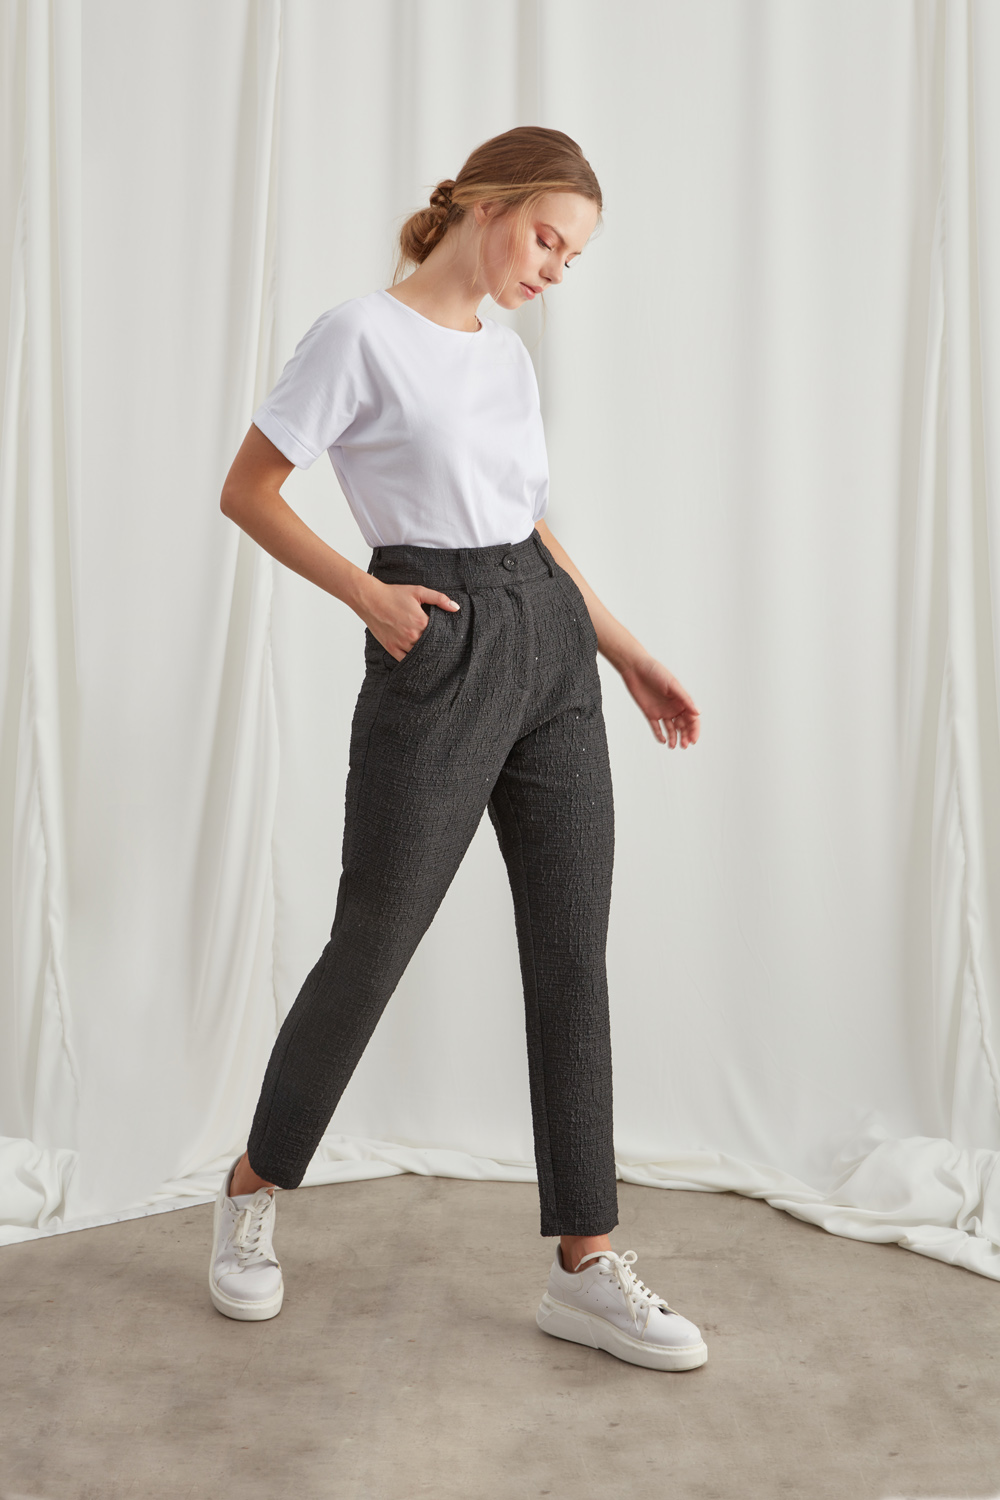 Anthracite Trousers with Jacquard